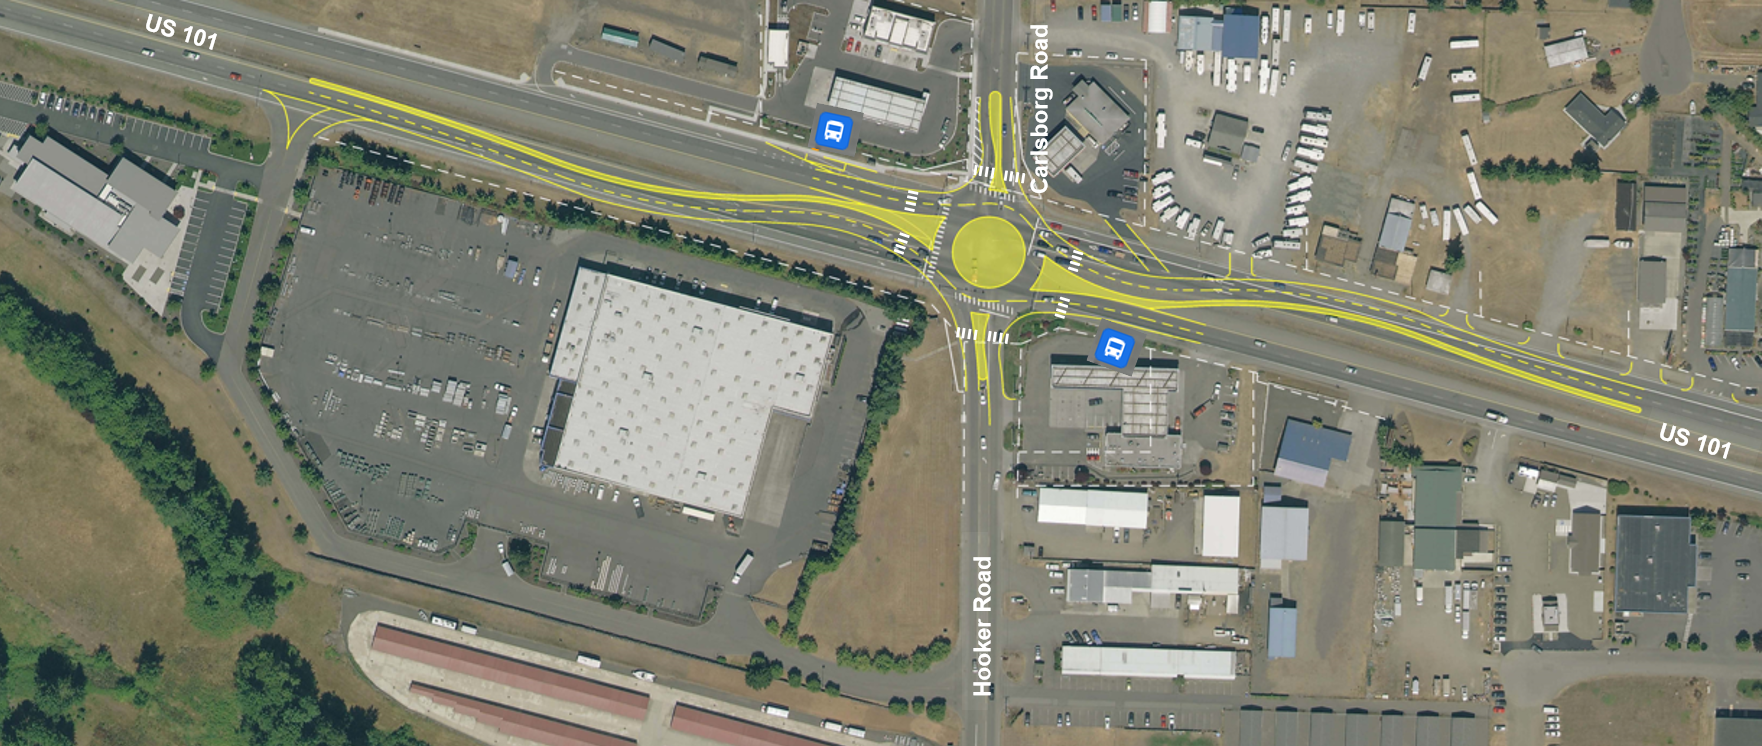 An aerial map image of the US 101 and Carlsborg Road intersection with a two-lane roundabout graphic drawn on top.